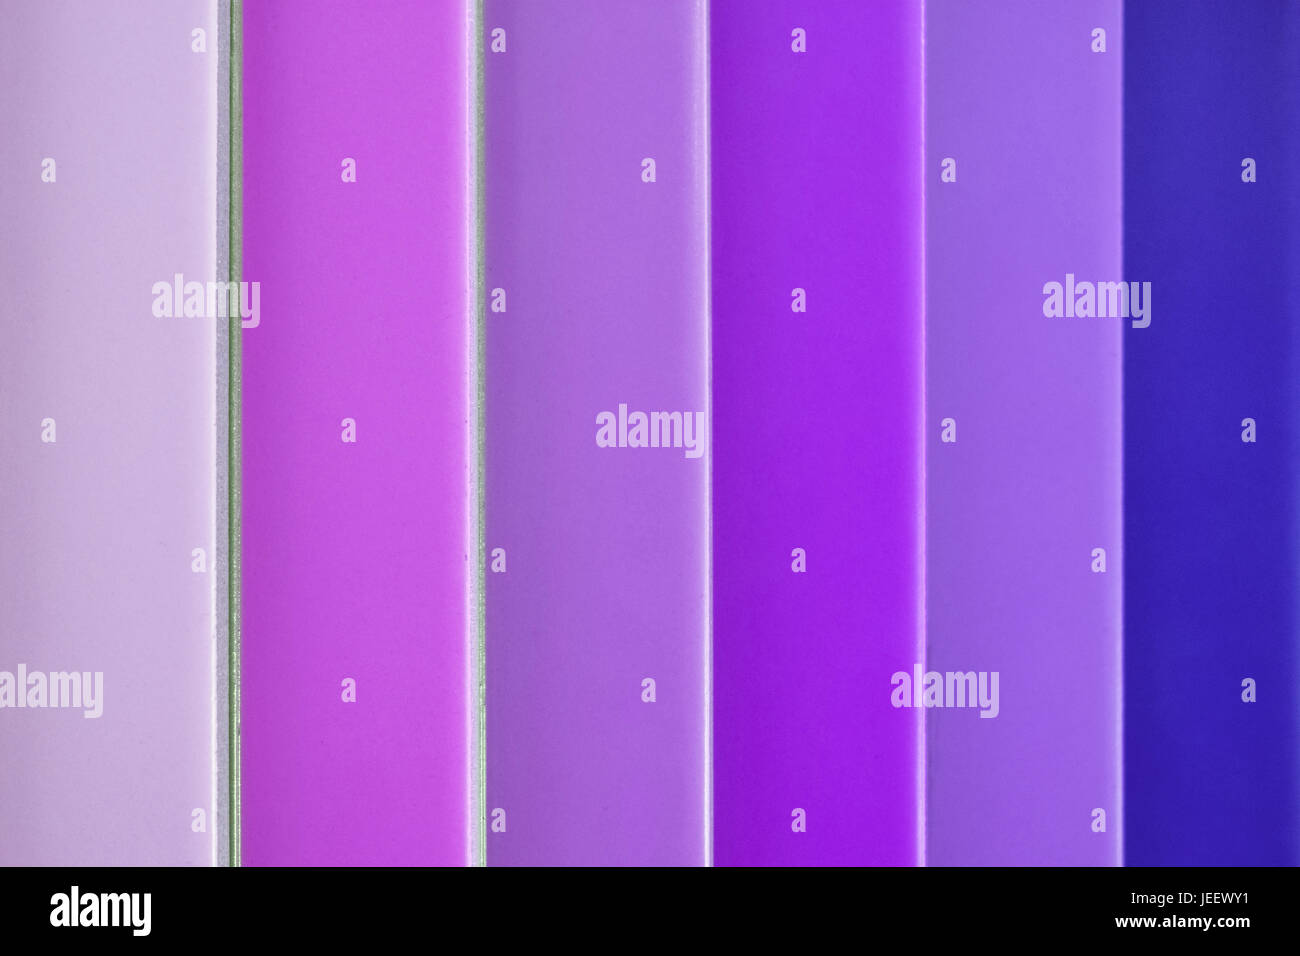 color samples , different colored tiles  - pink, purple tones Stock Photo